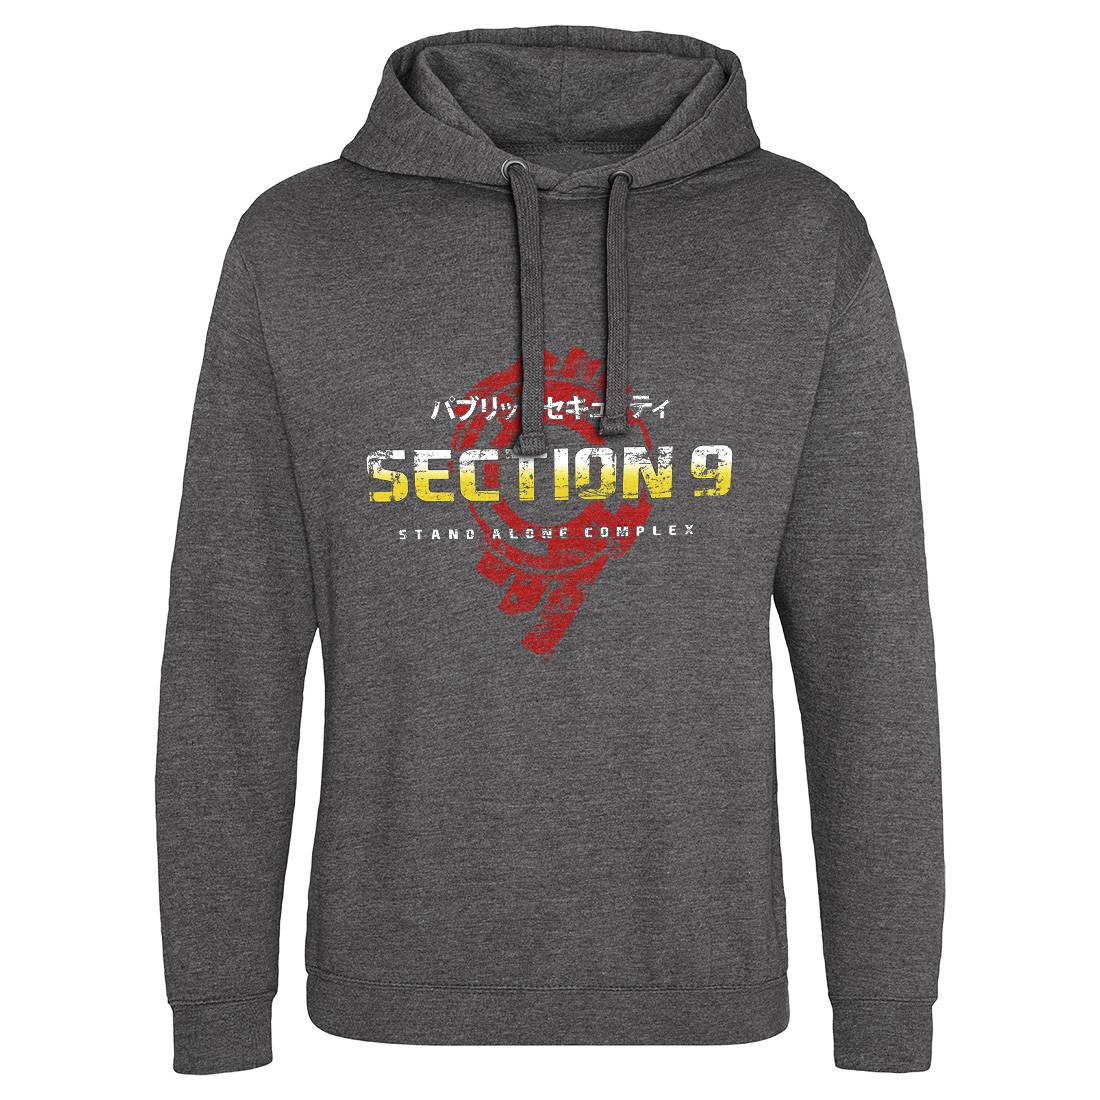 Section 9 Mens Hoodie Without Pocket Space D193